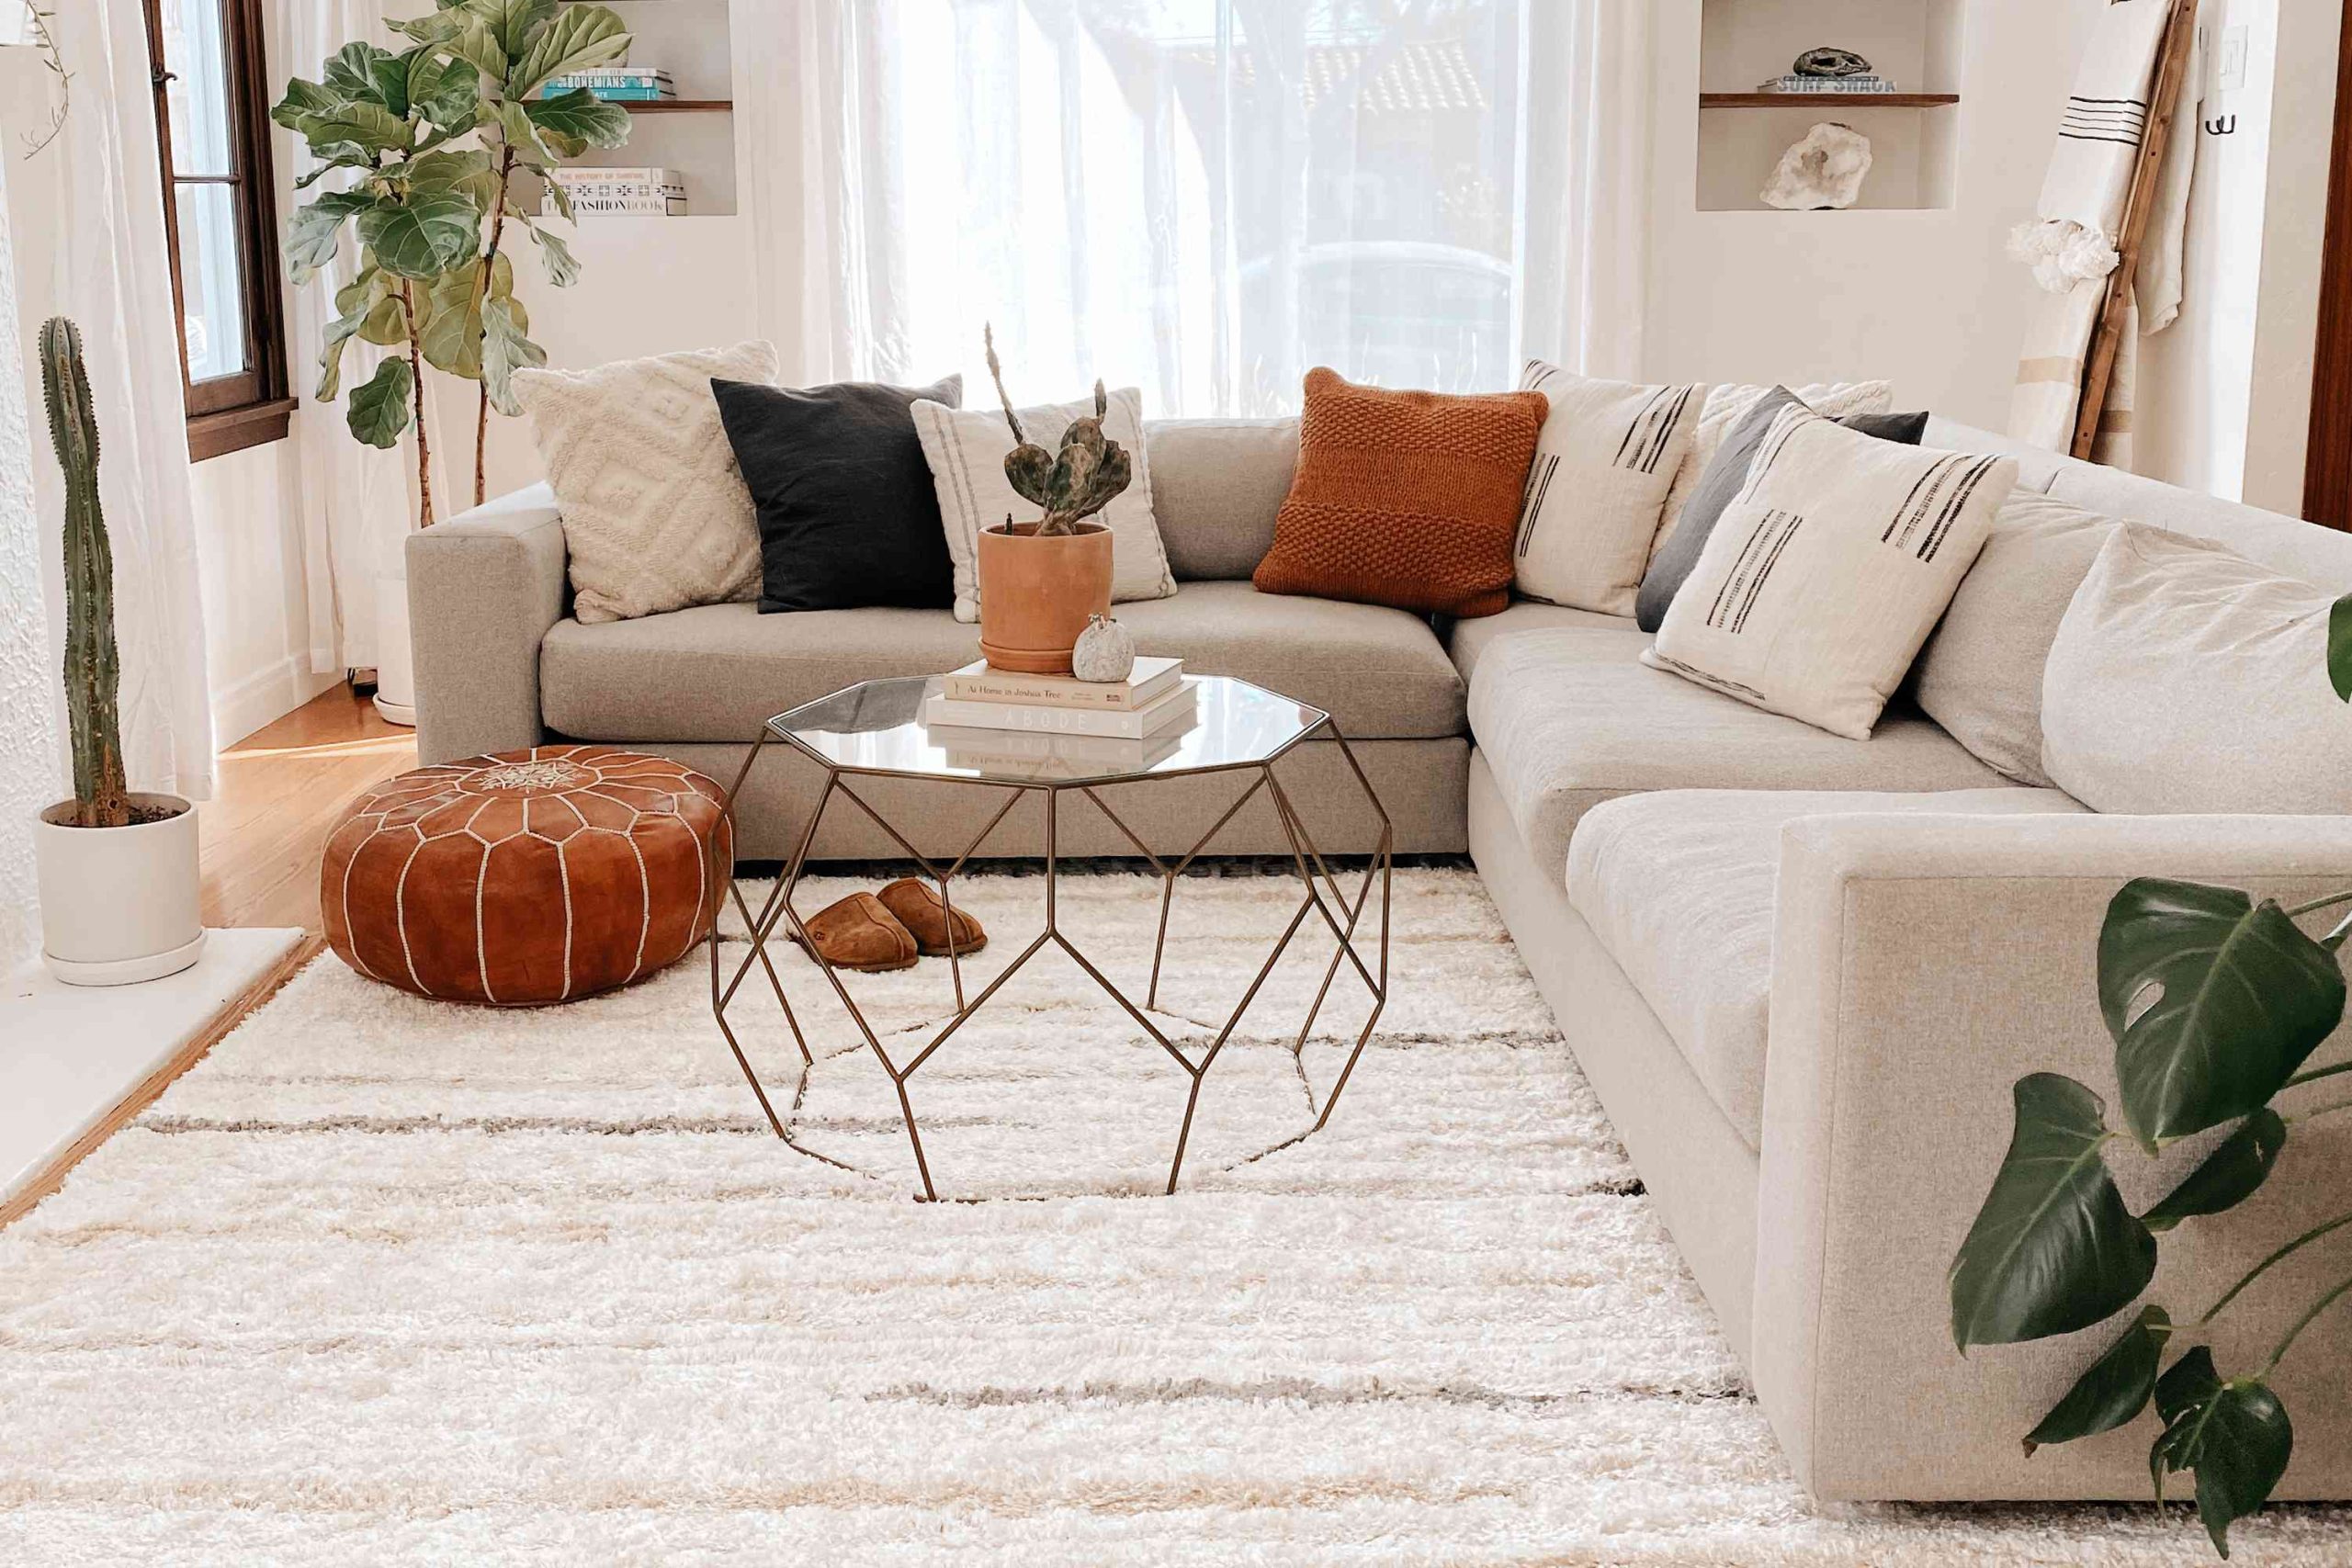 How Much of a Living Room Should a Rug Cover?